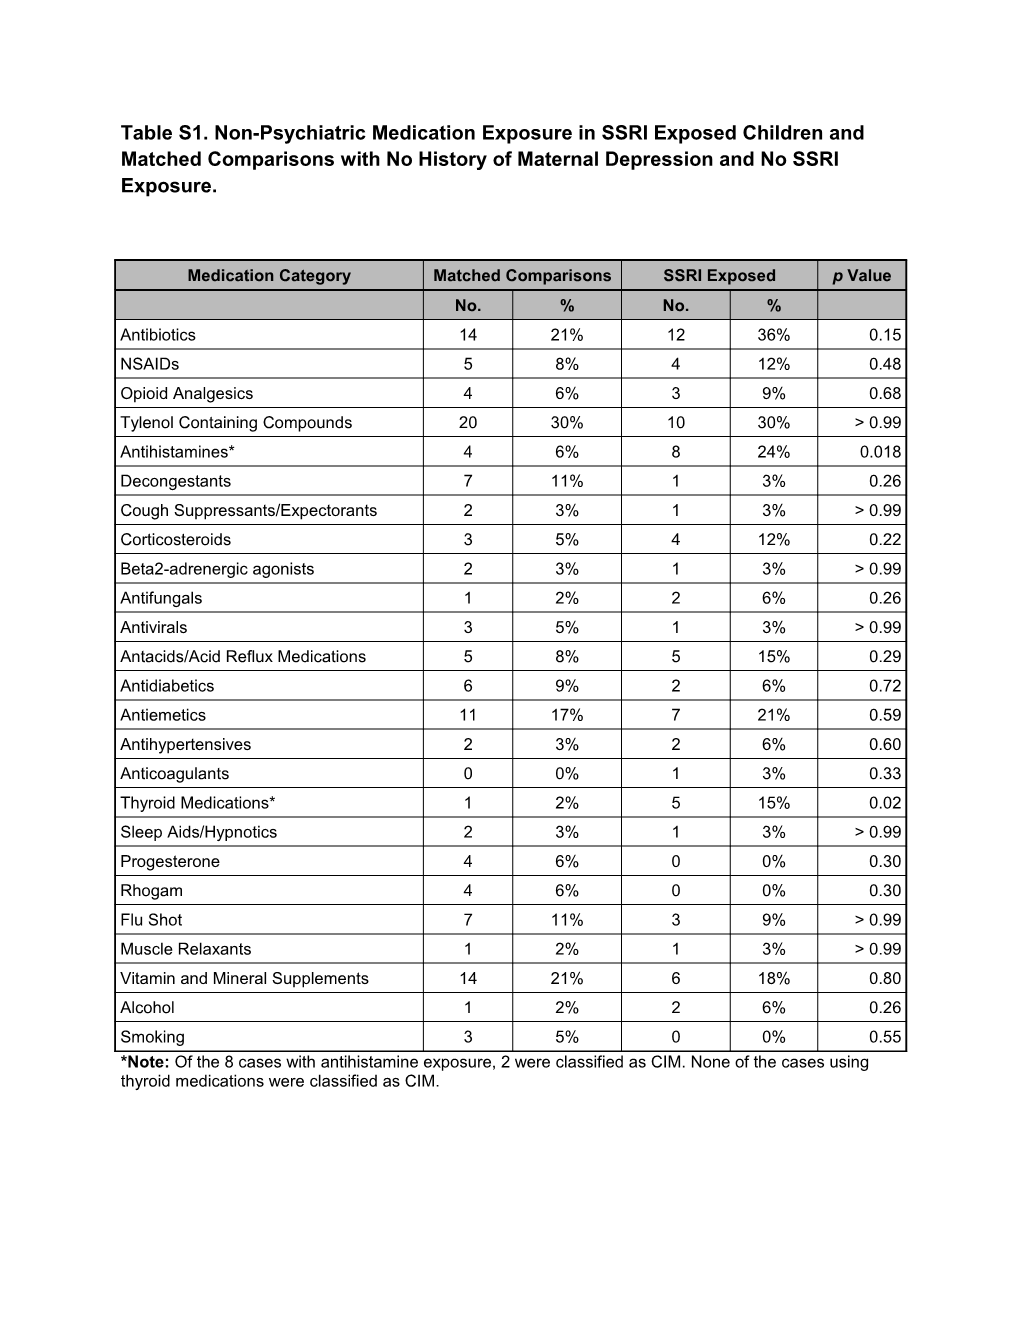 Table S1. Non-Psychiatric Medication Exposure in SSRI Exposed Children and Matched Comparisons